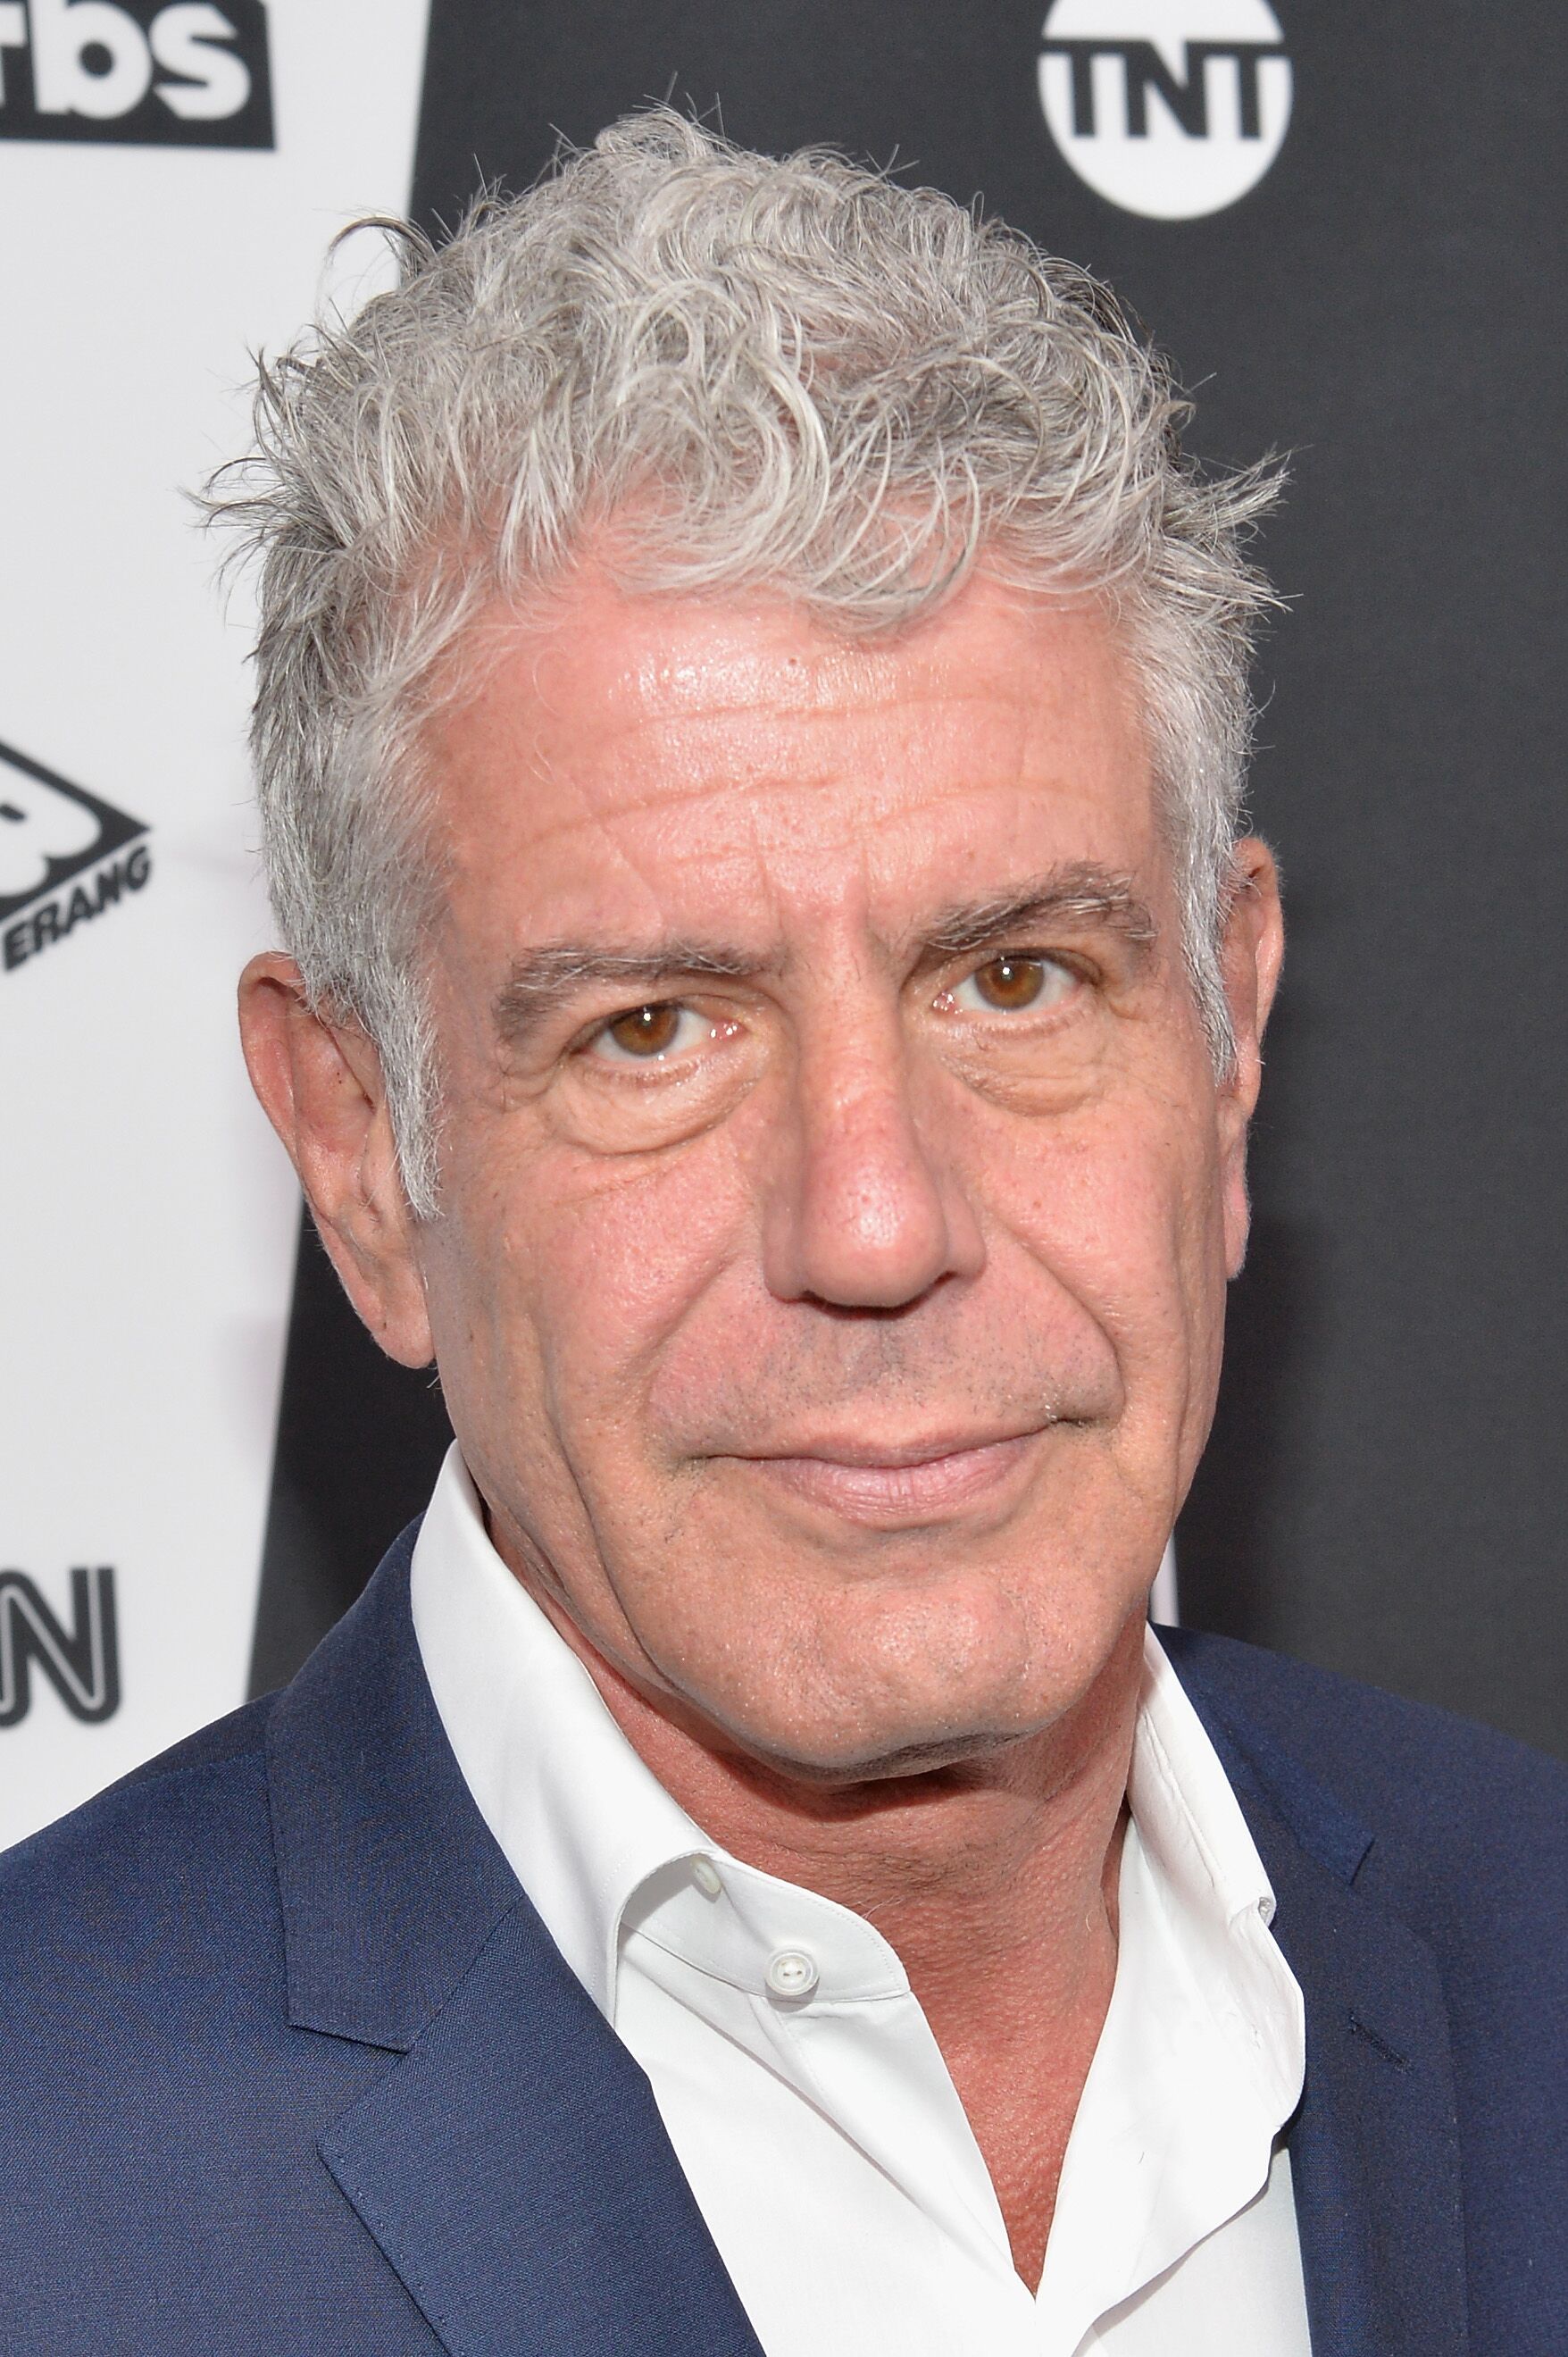 Chef Anthony Bourdain attends the Turner Upfront 2016 at Nick & Stef's Steakhouse on May 18, 2016 in New York City | Photo: Getty Images